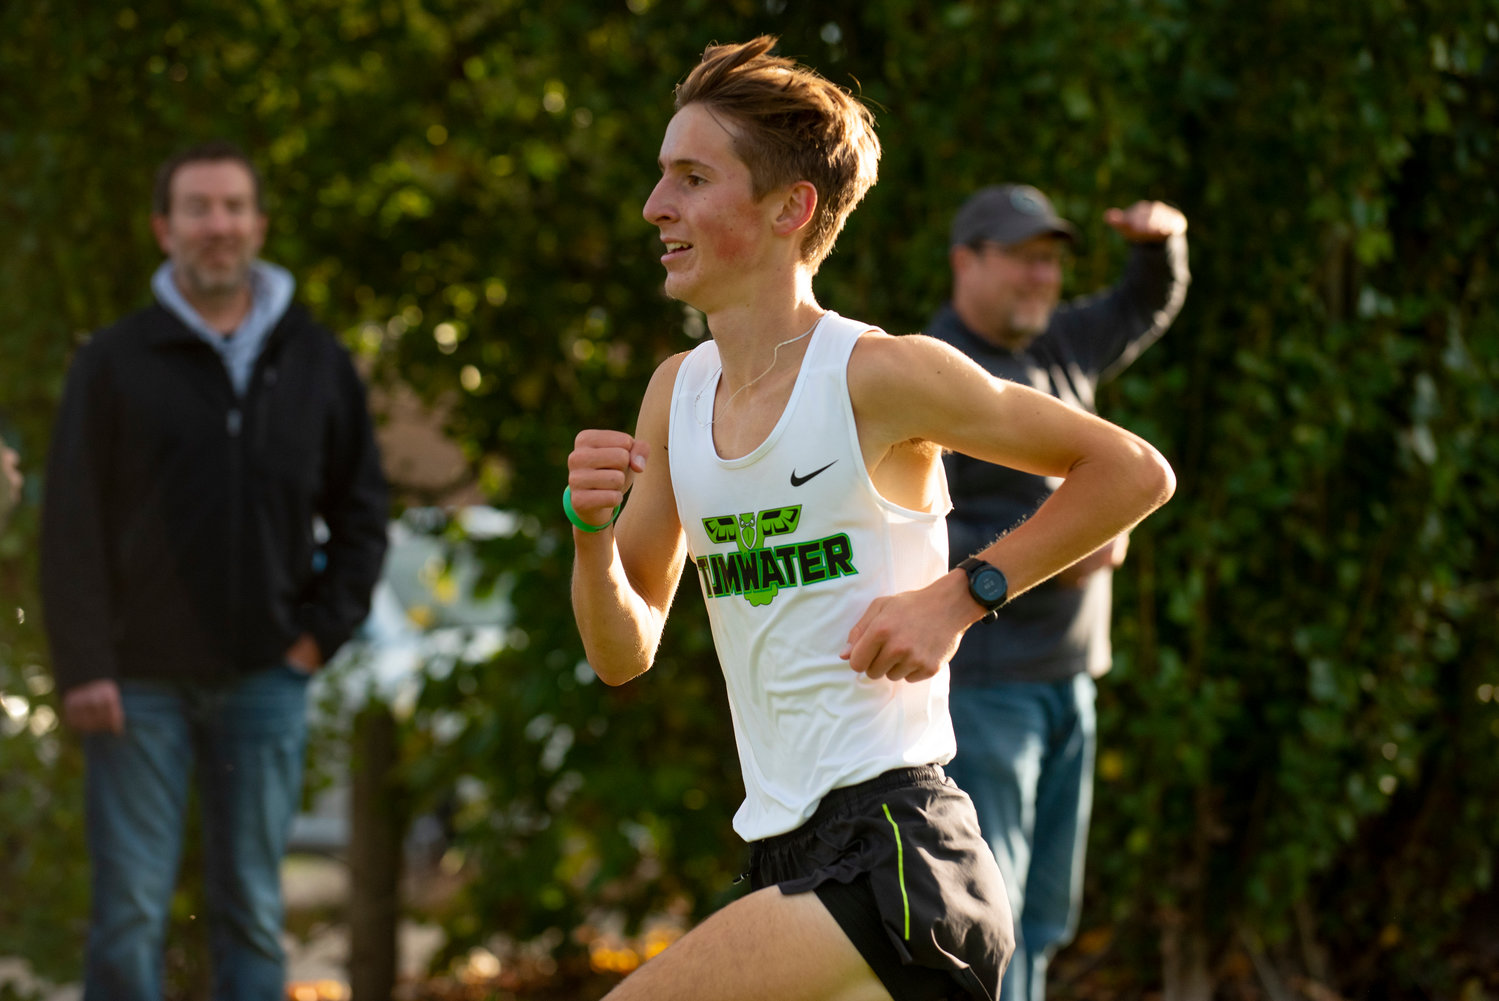 Tumwater's John Hoffer crosses the finish line in first place at a meet in Stan Hedwall Park on Wednesday, Oct. 6, 2021.